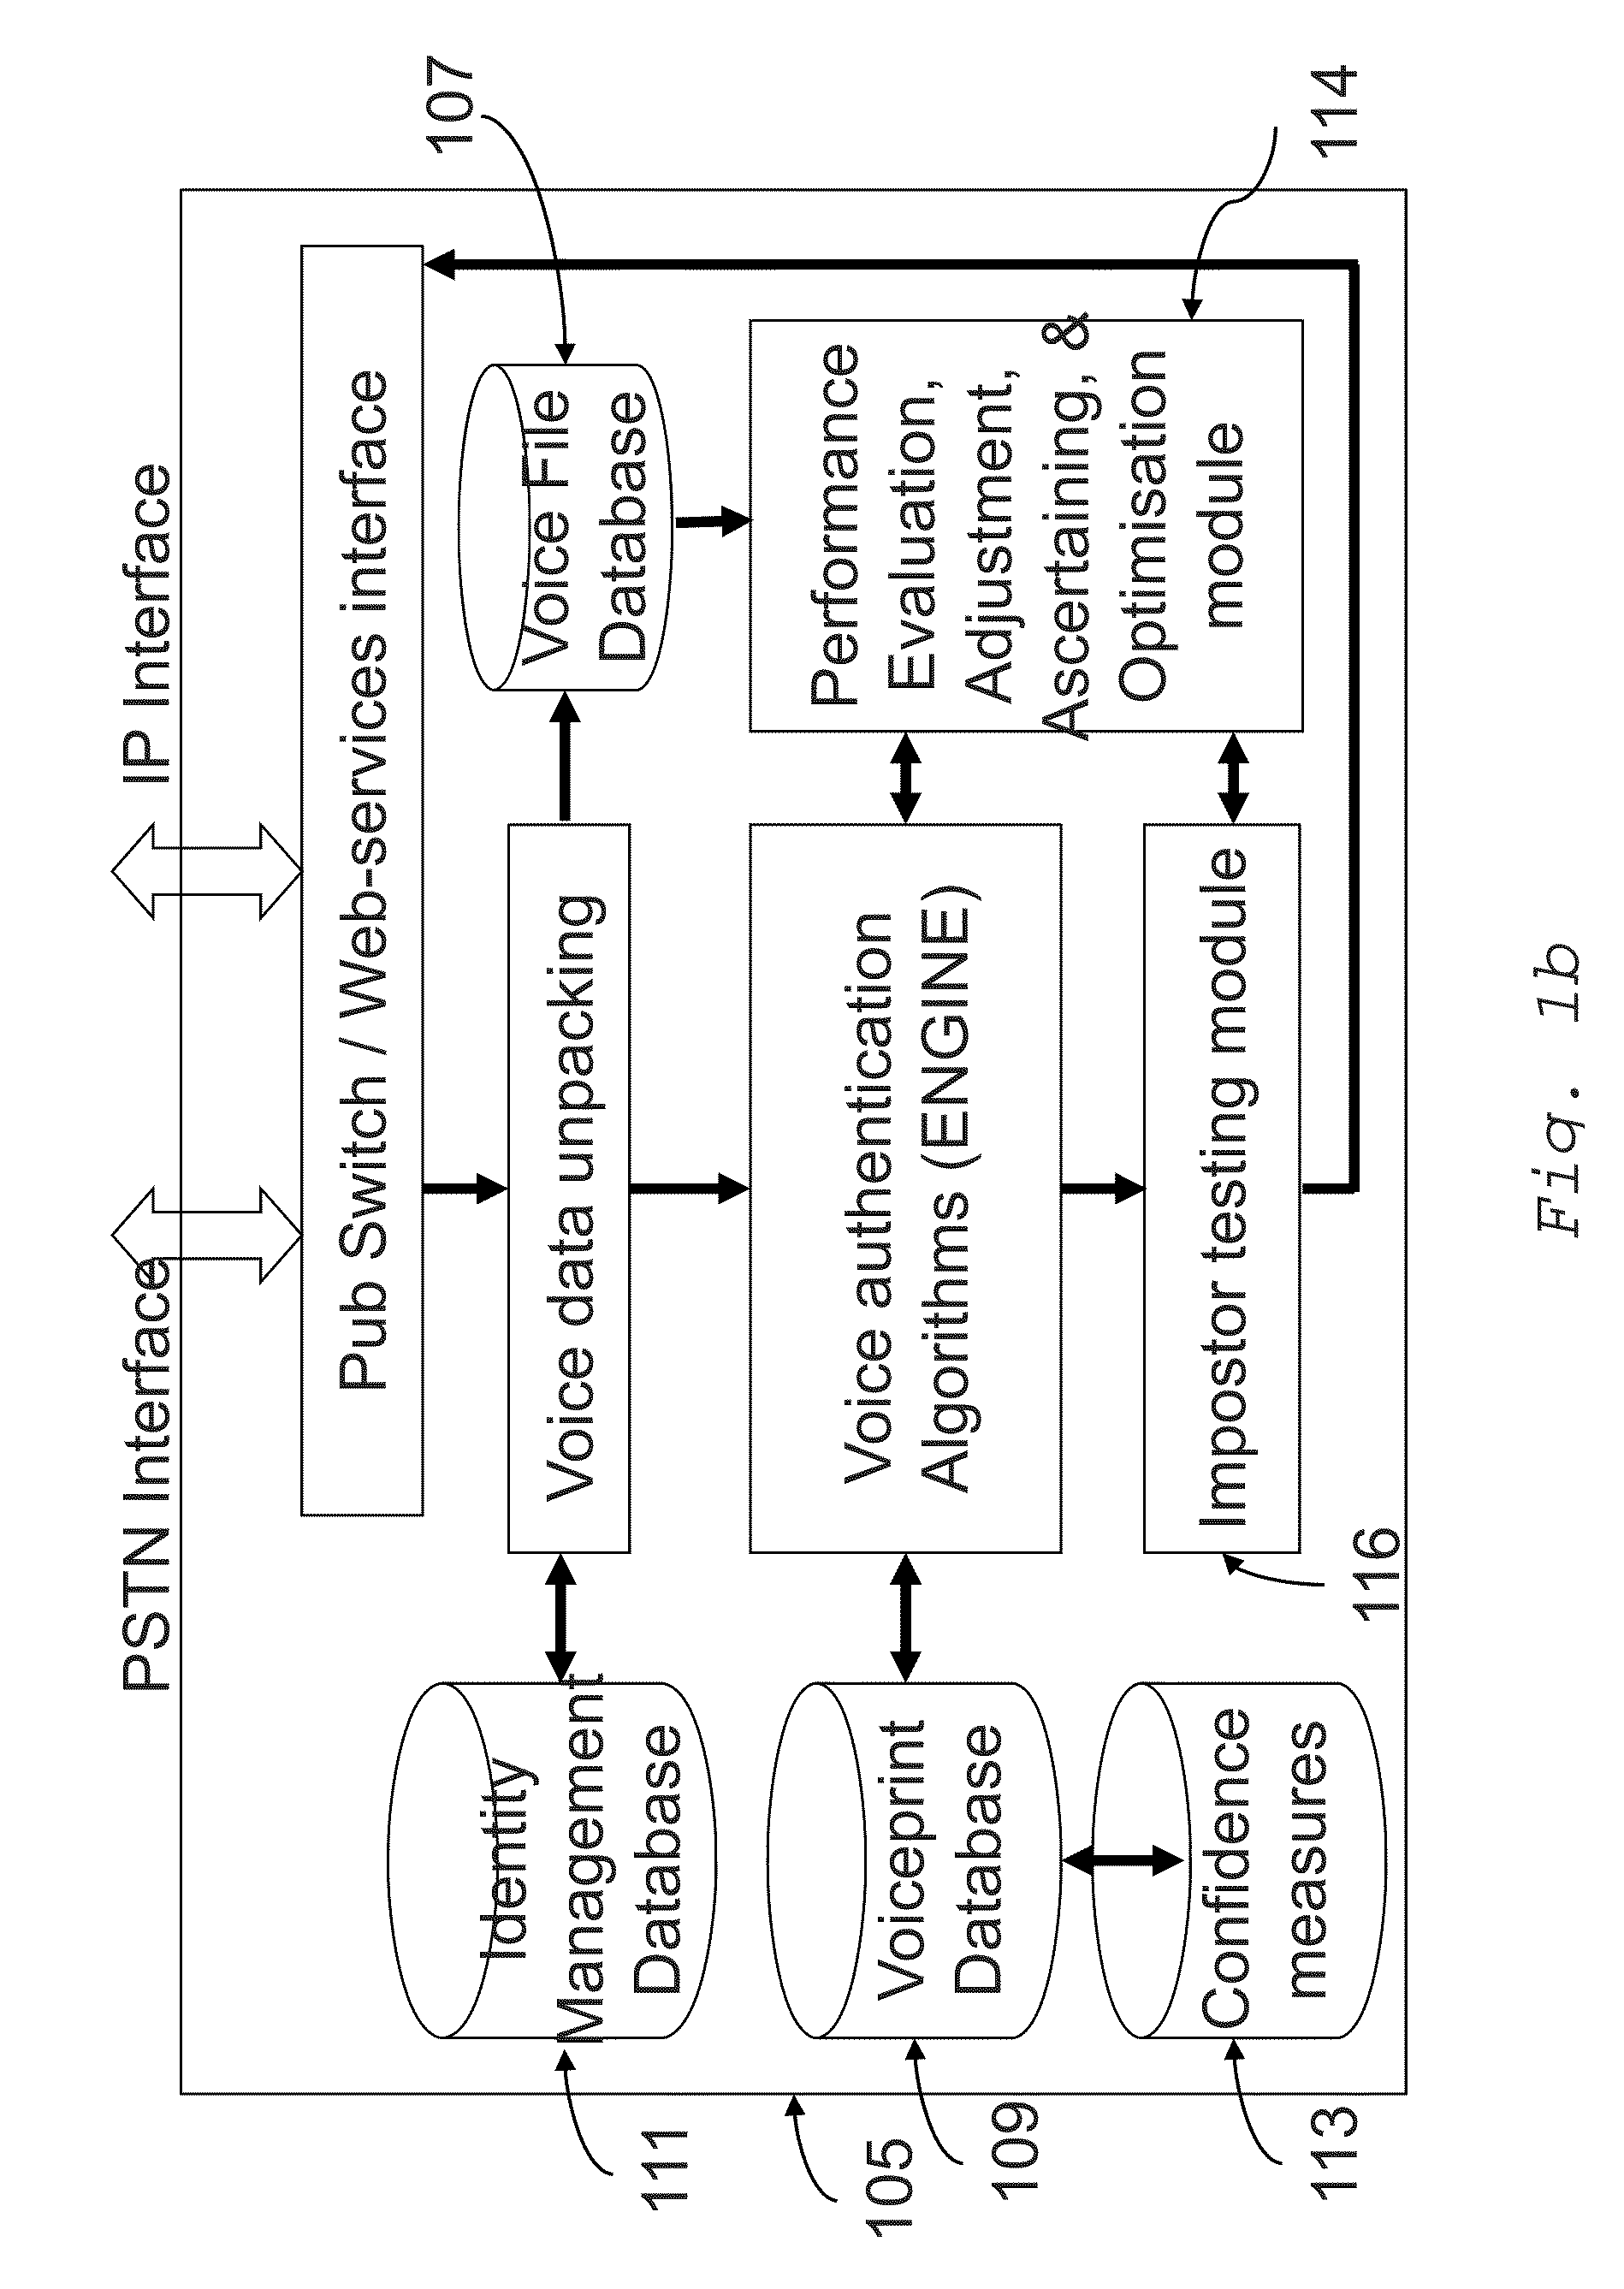 Voice authentication system and methods